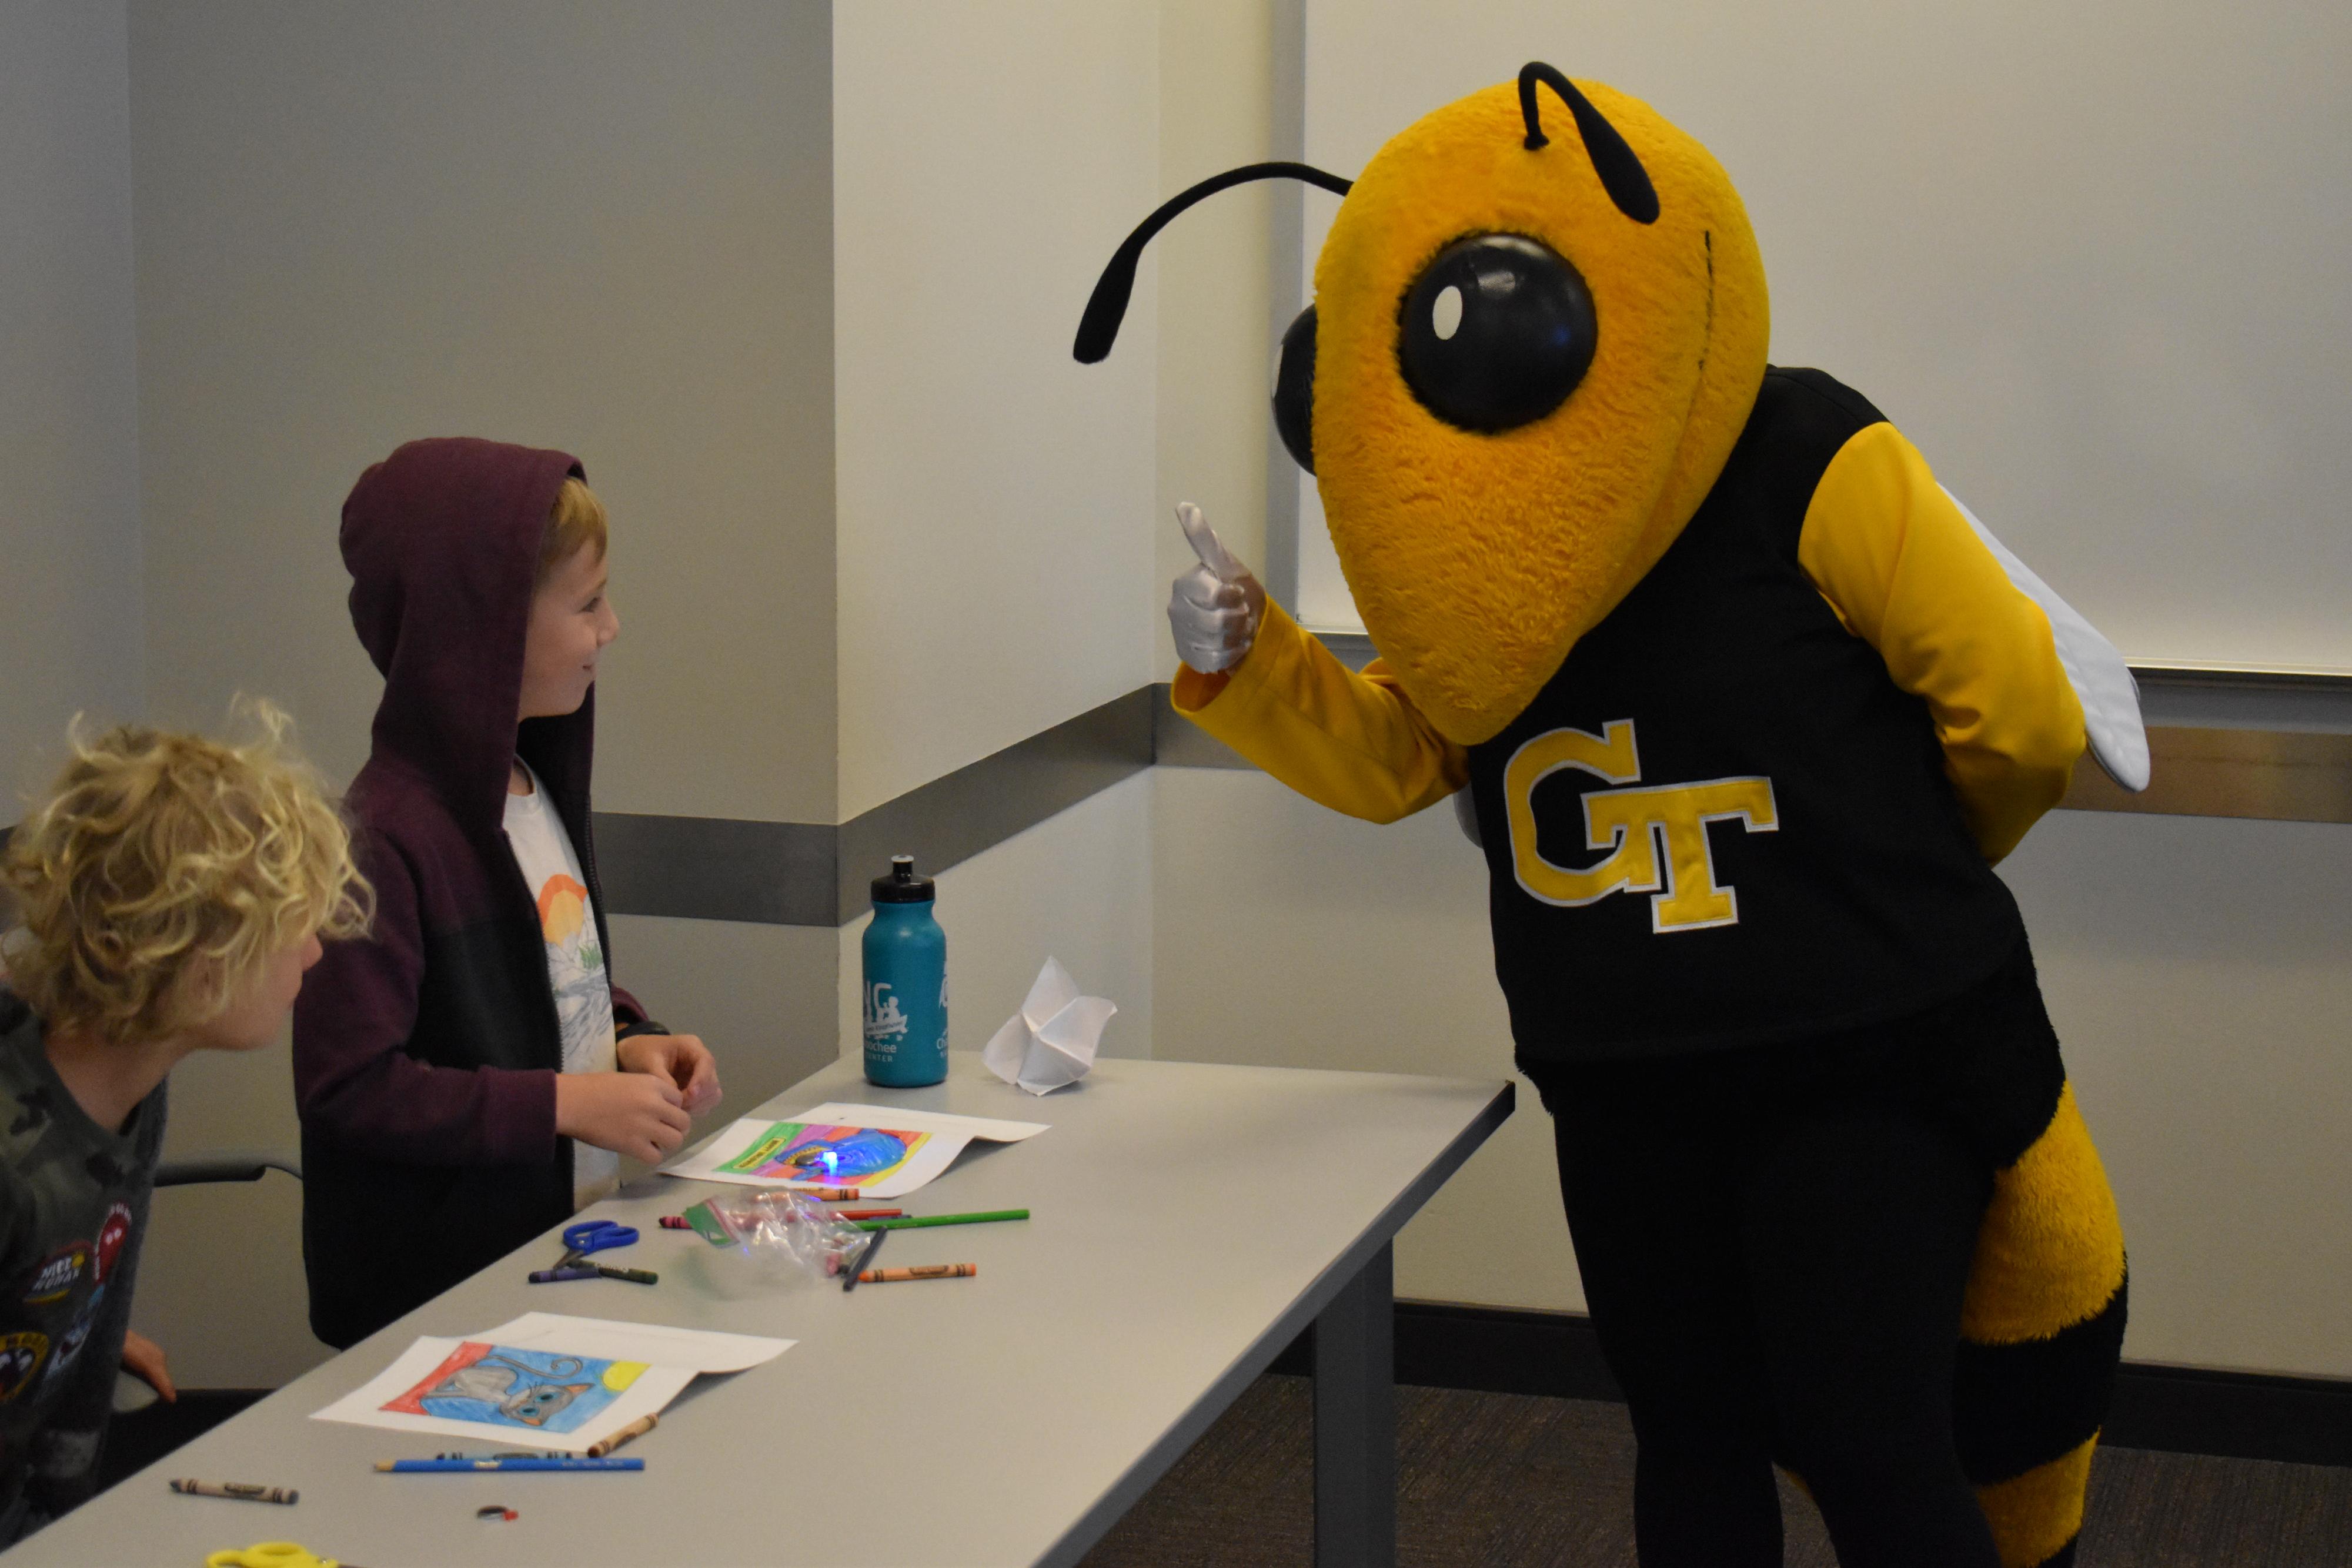 Buzz interacting with student.